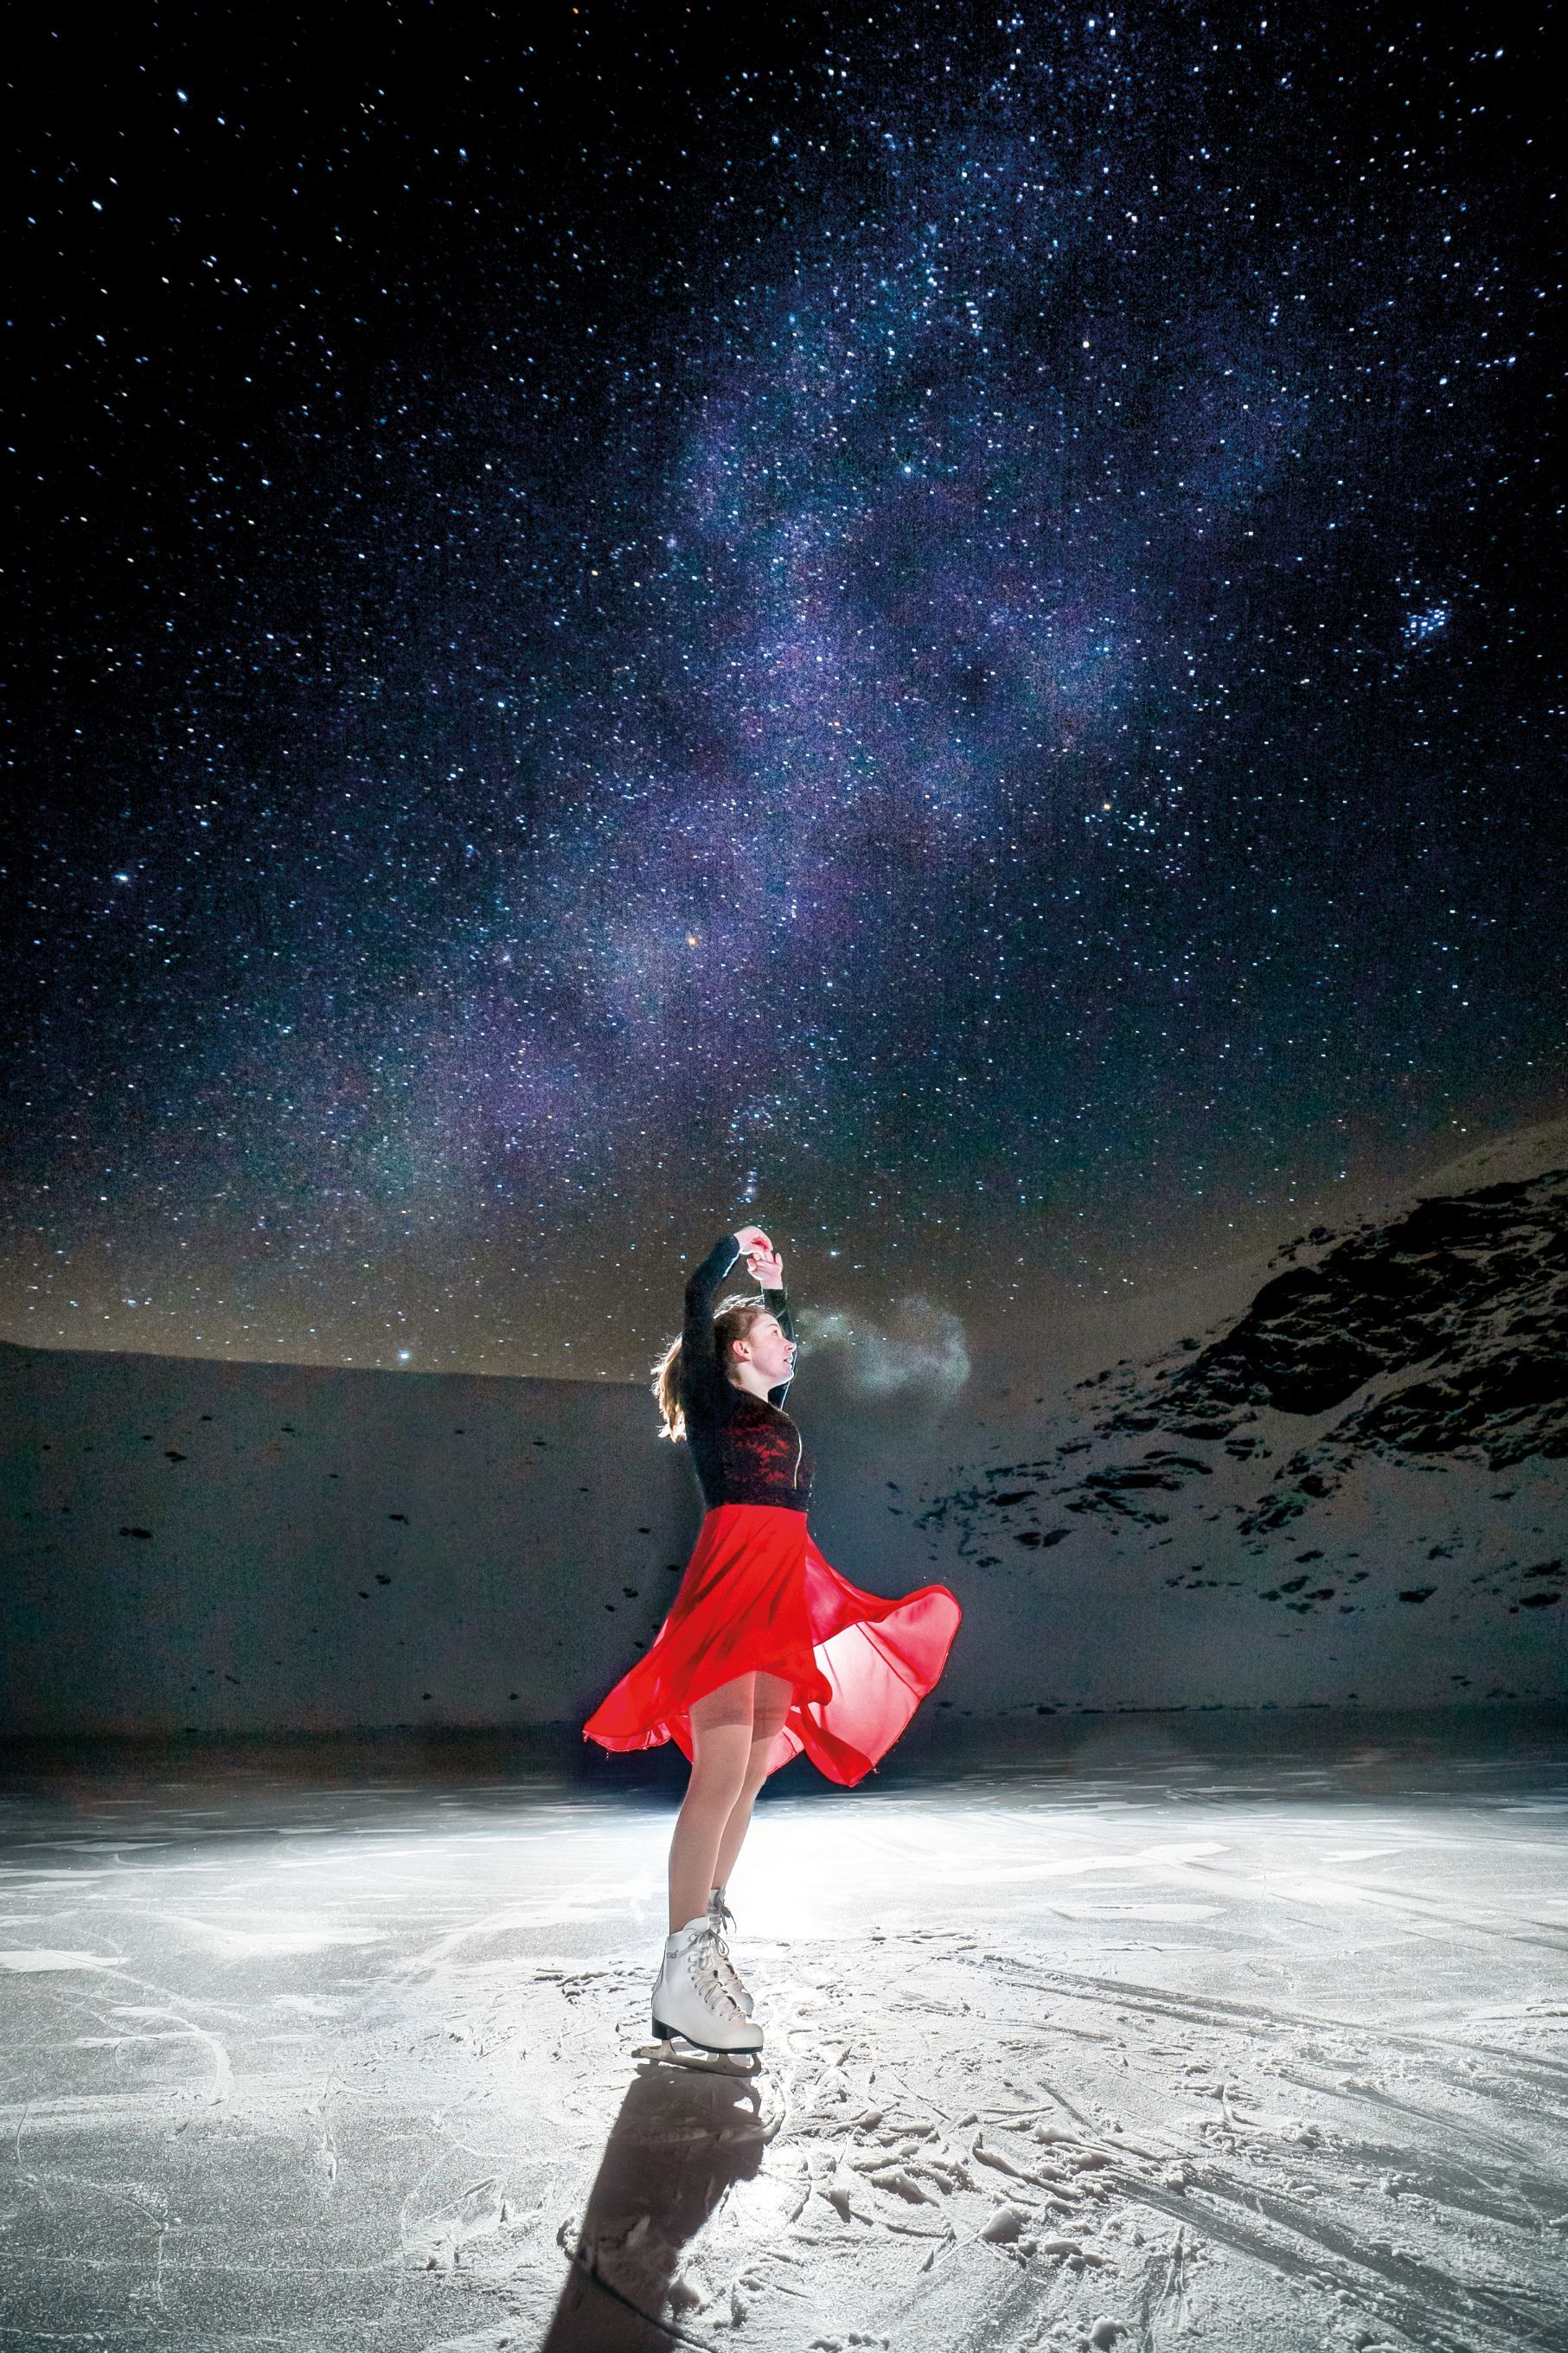 Esther Newton performs under the stars on Scales Tarn, Blencathra (a single 30-second exposure was used to capture the night sky, while strobes froze Esther in action). Photo: Tom McNally